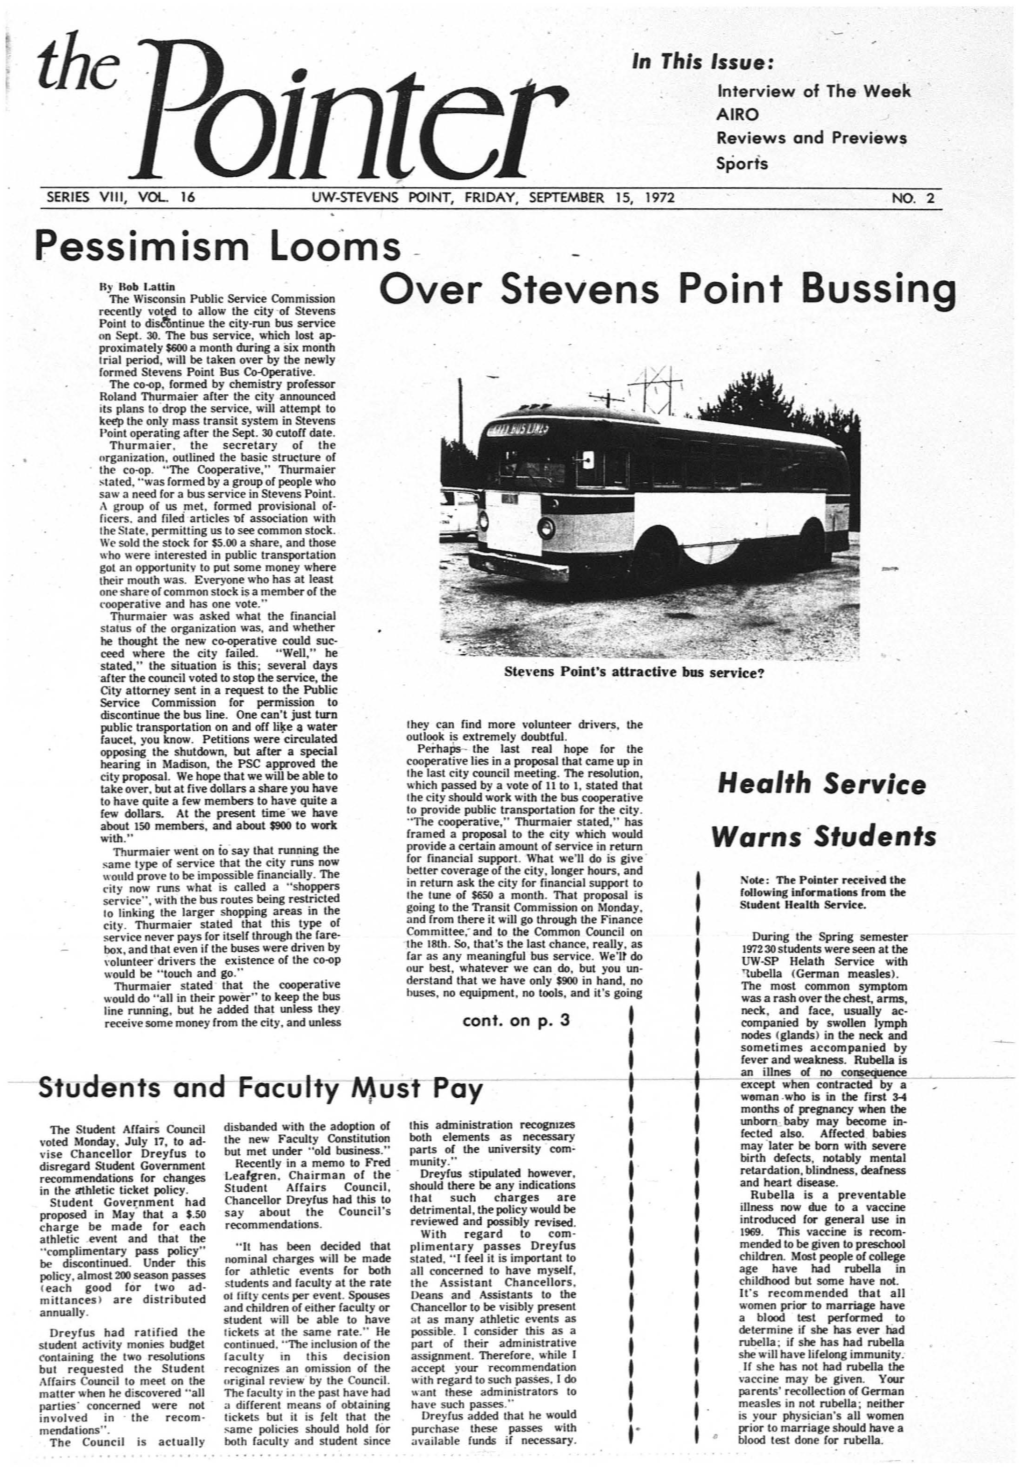 Over Stevens Point Bussing Recently Volf(I to Allow the City ·Of Stevens Point to Di~Ntinue the City.Run Bus Service on Sept